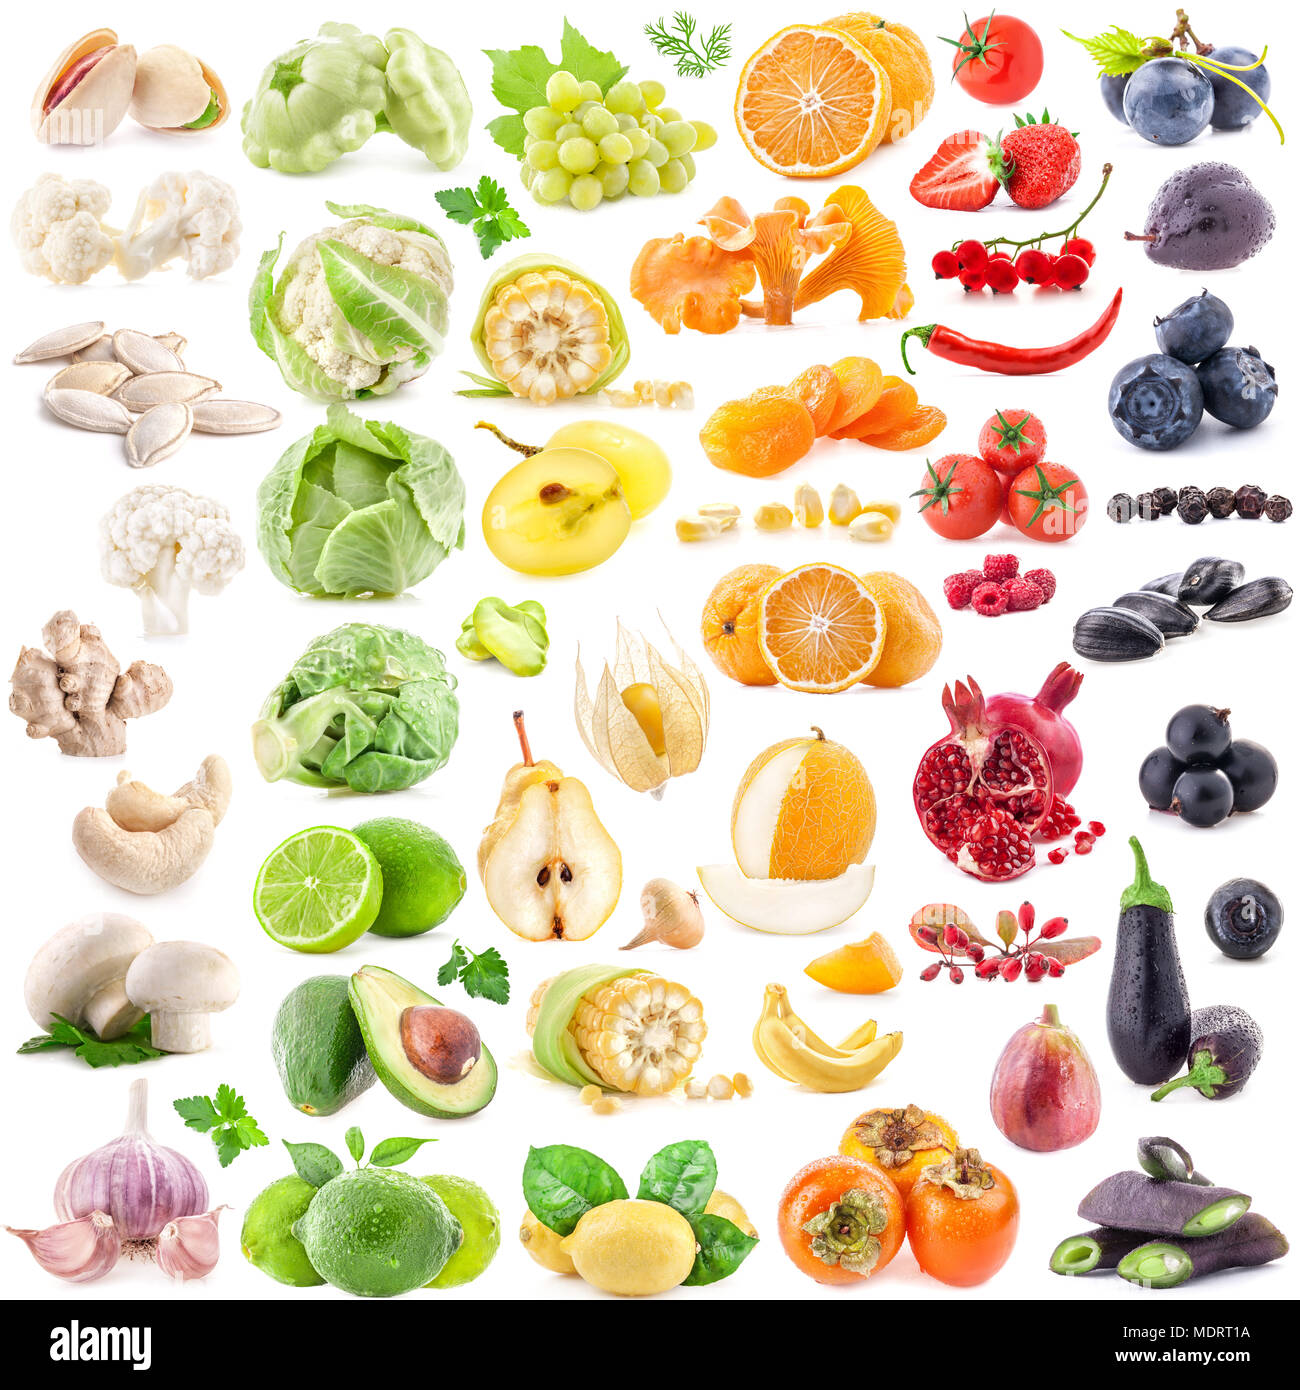 Fruits and vegetables background Stock Photo